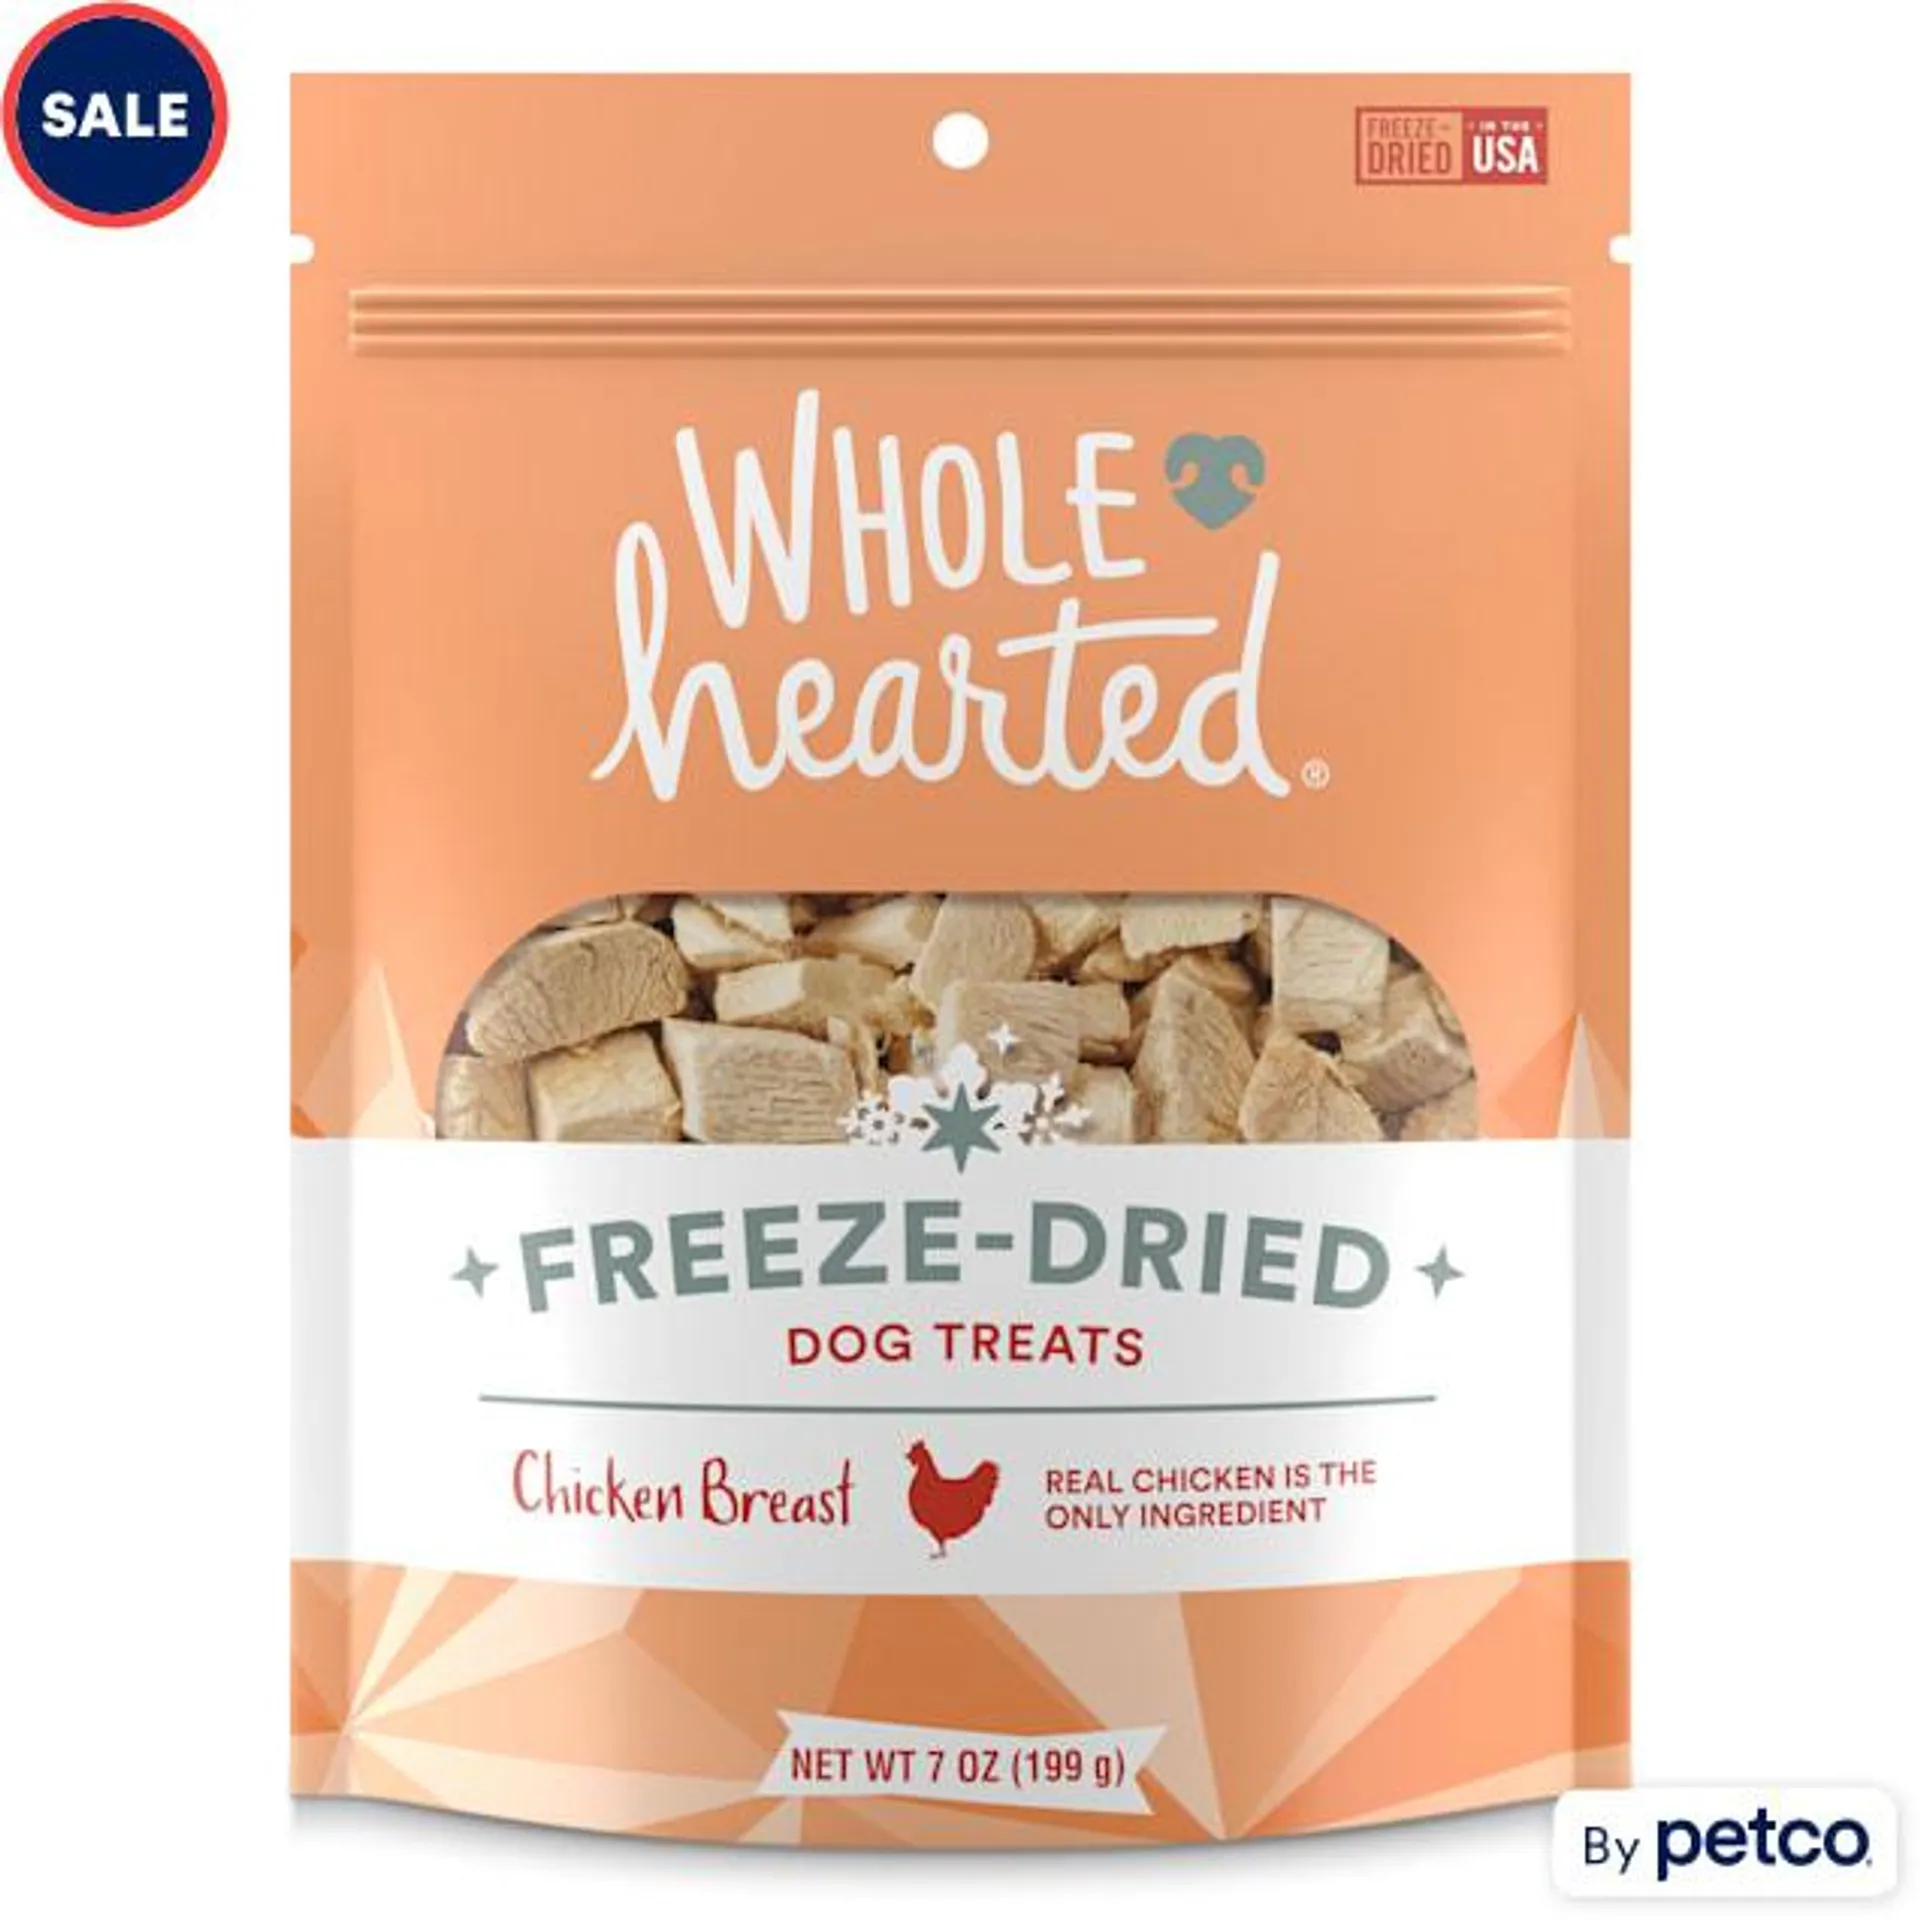 WholeHearted Chicken Breast Freeze-Dried Dog Treats, 7 oz.